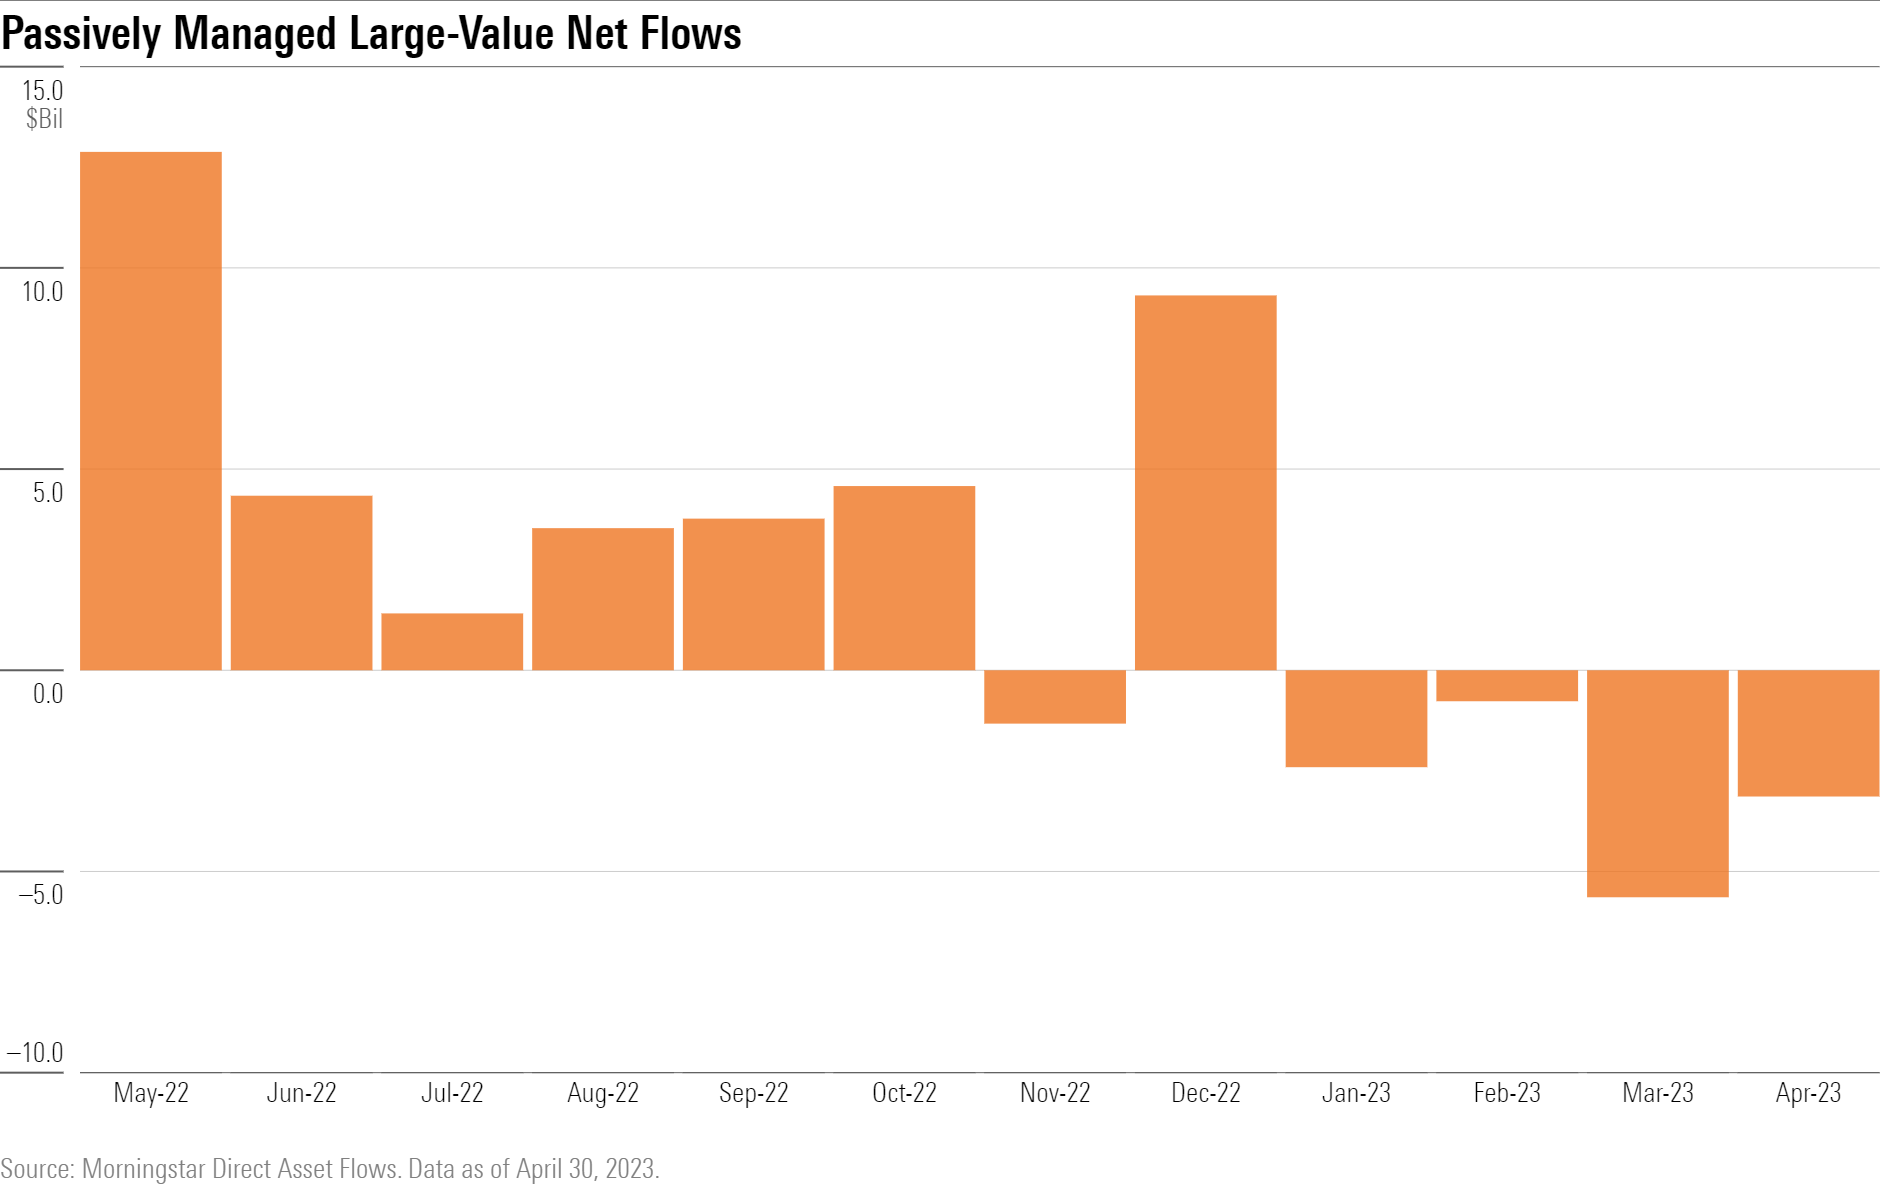 Bar chart of large-value fund flows.